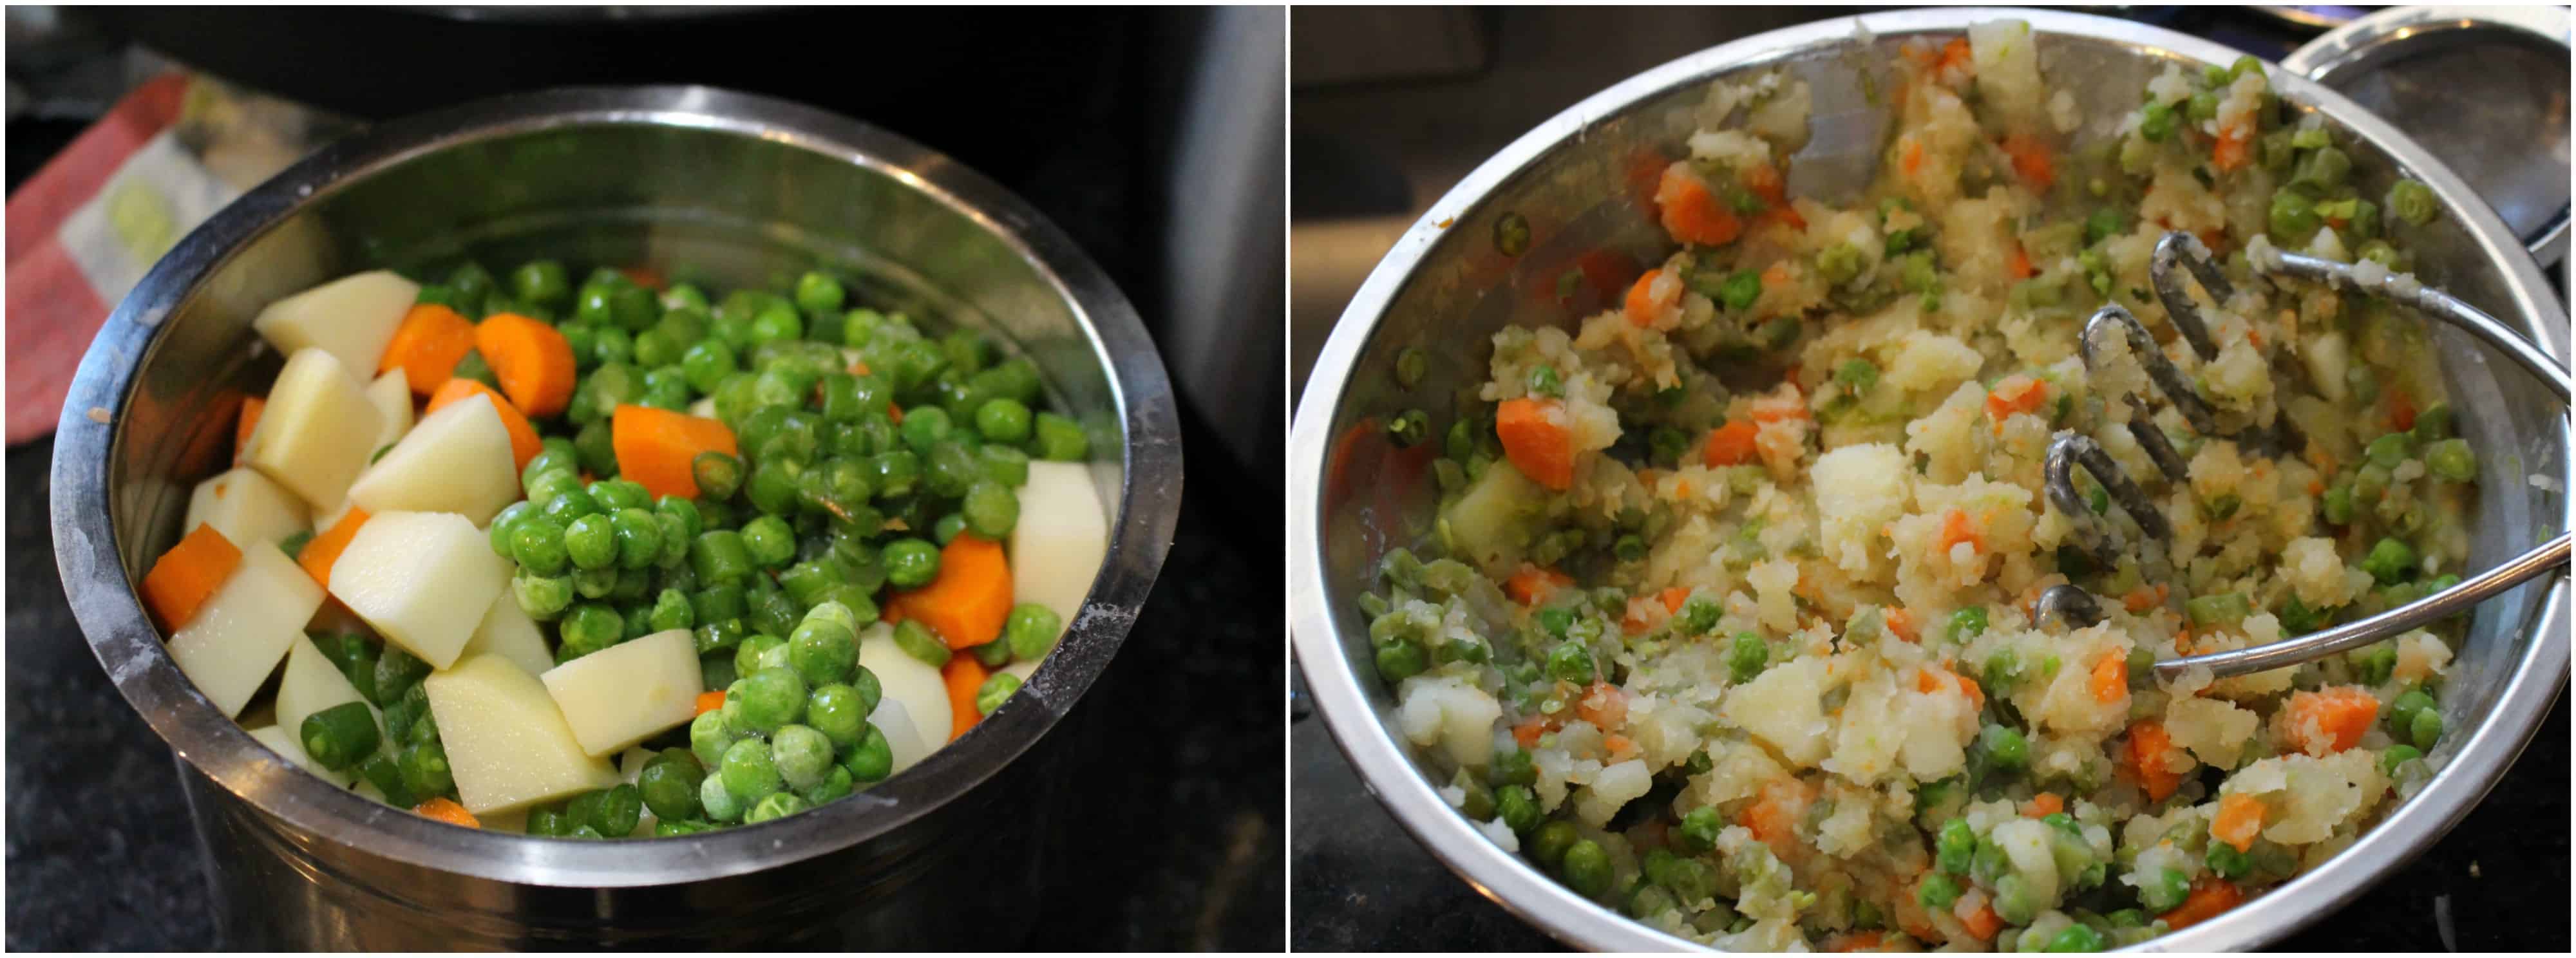 Cooking and mashing the vegetables.